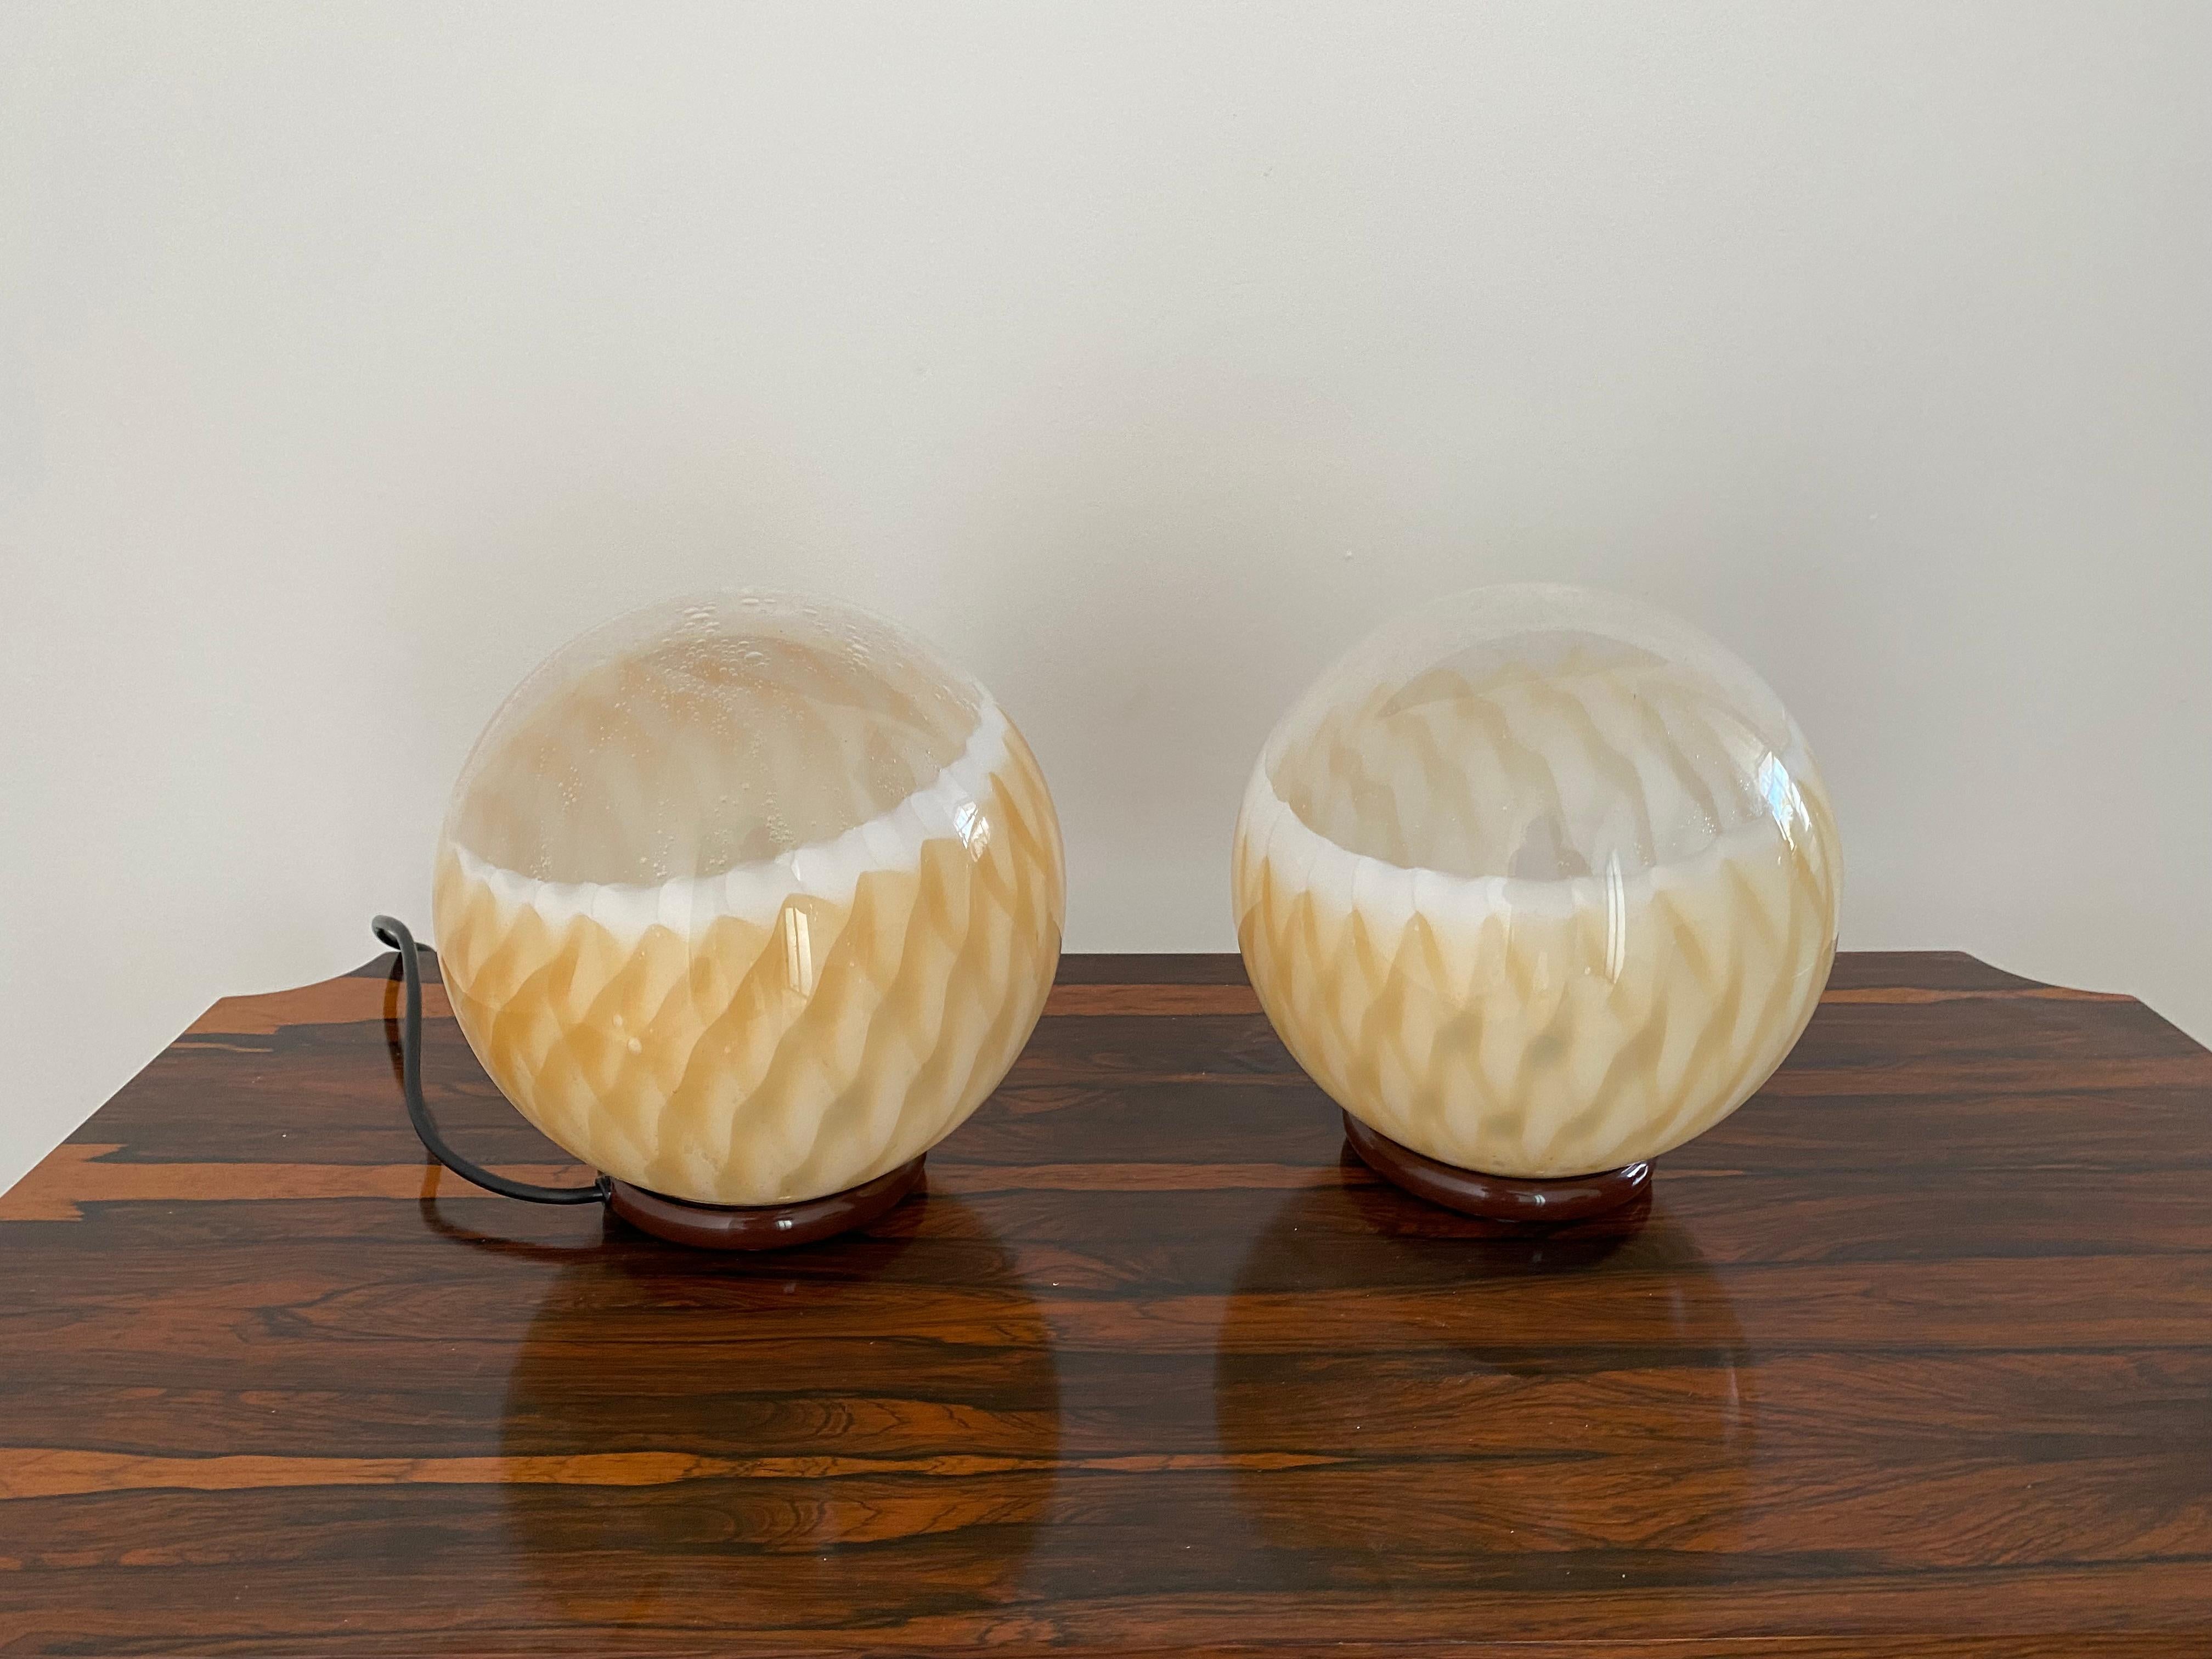 Space age one-light table lamps attributed to Mazzega, circa 1970.
Manufactured in a pattern of mottled orange, clear and white Murano glass and a brown lacquered metal base.
Priced Individually.
They're both the same size.